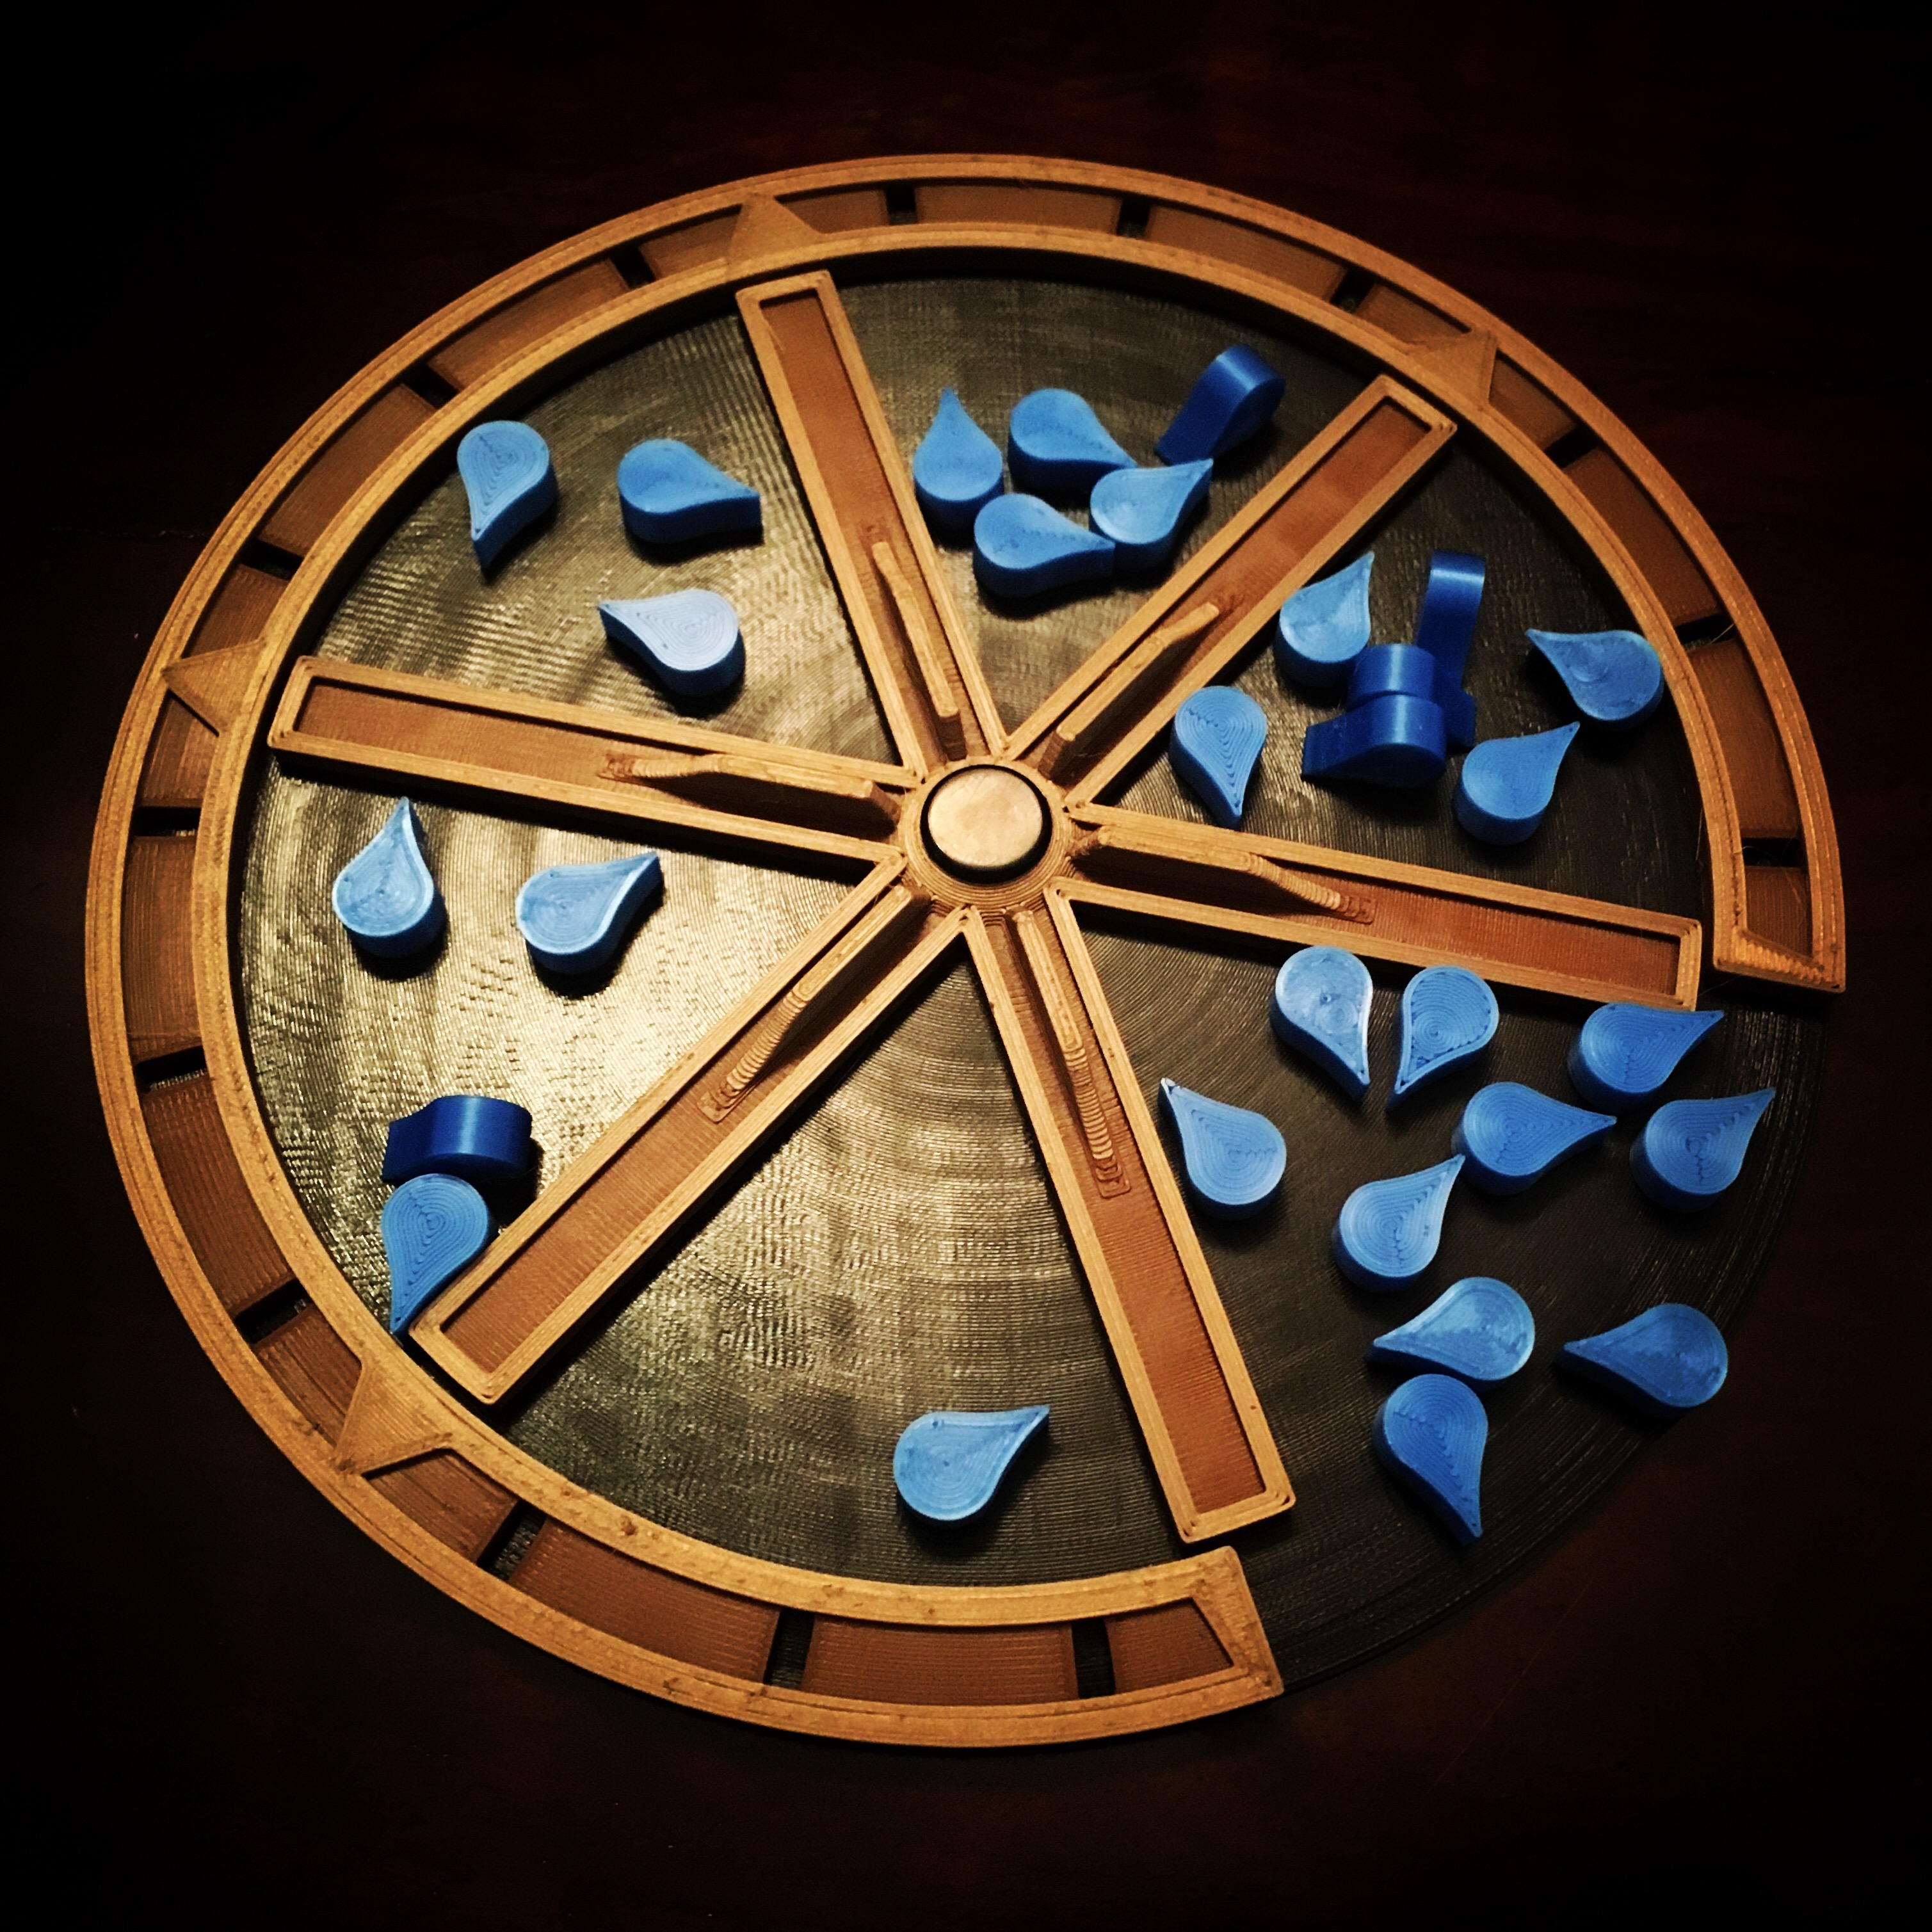 Construction Wheel for Barrage (boardgame)